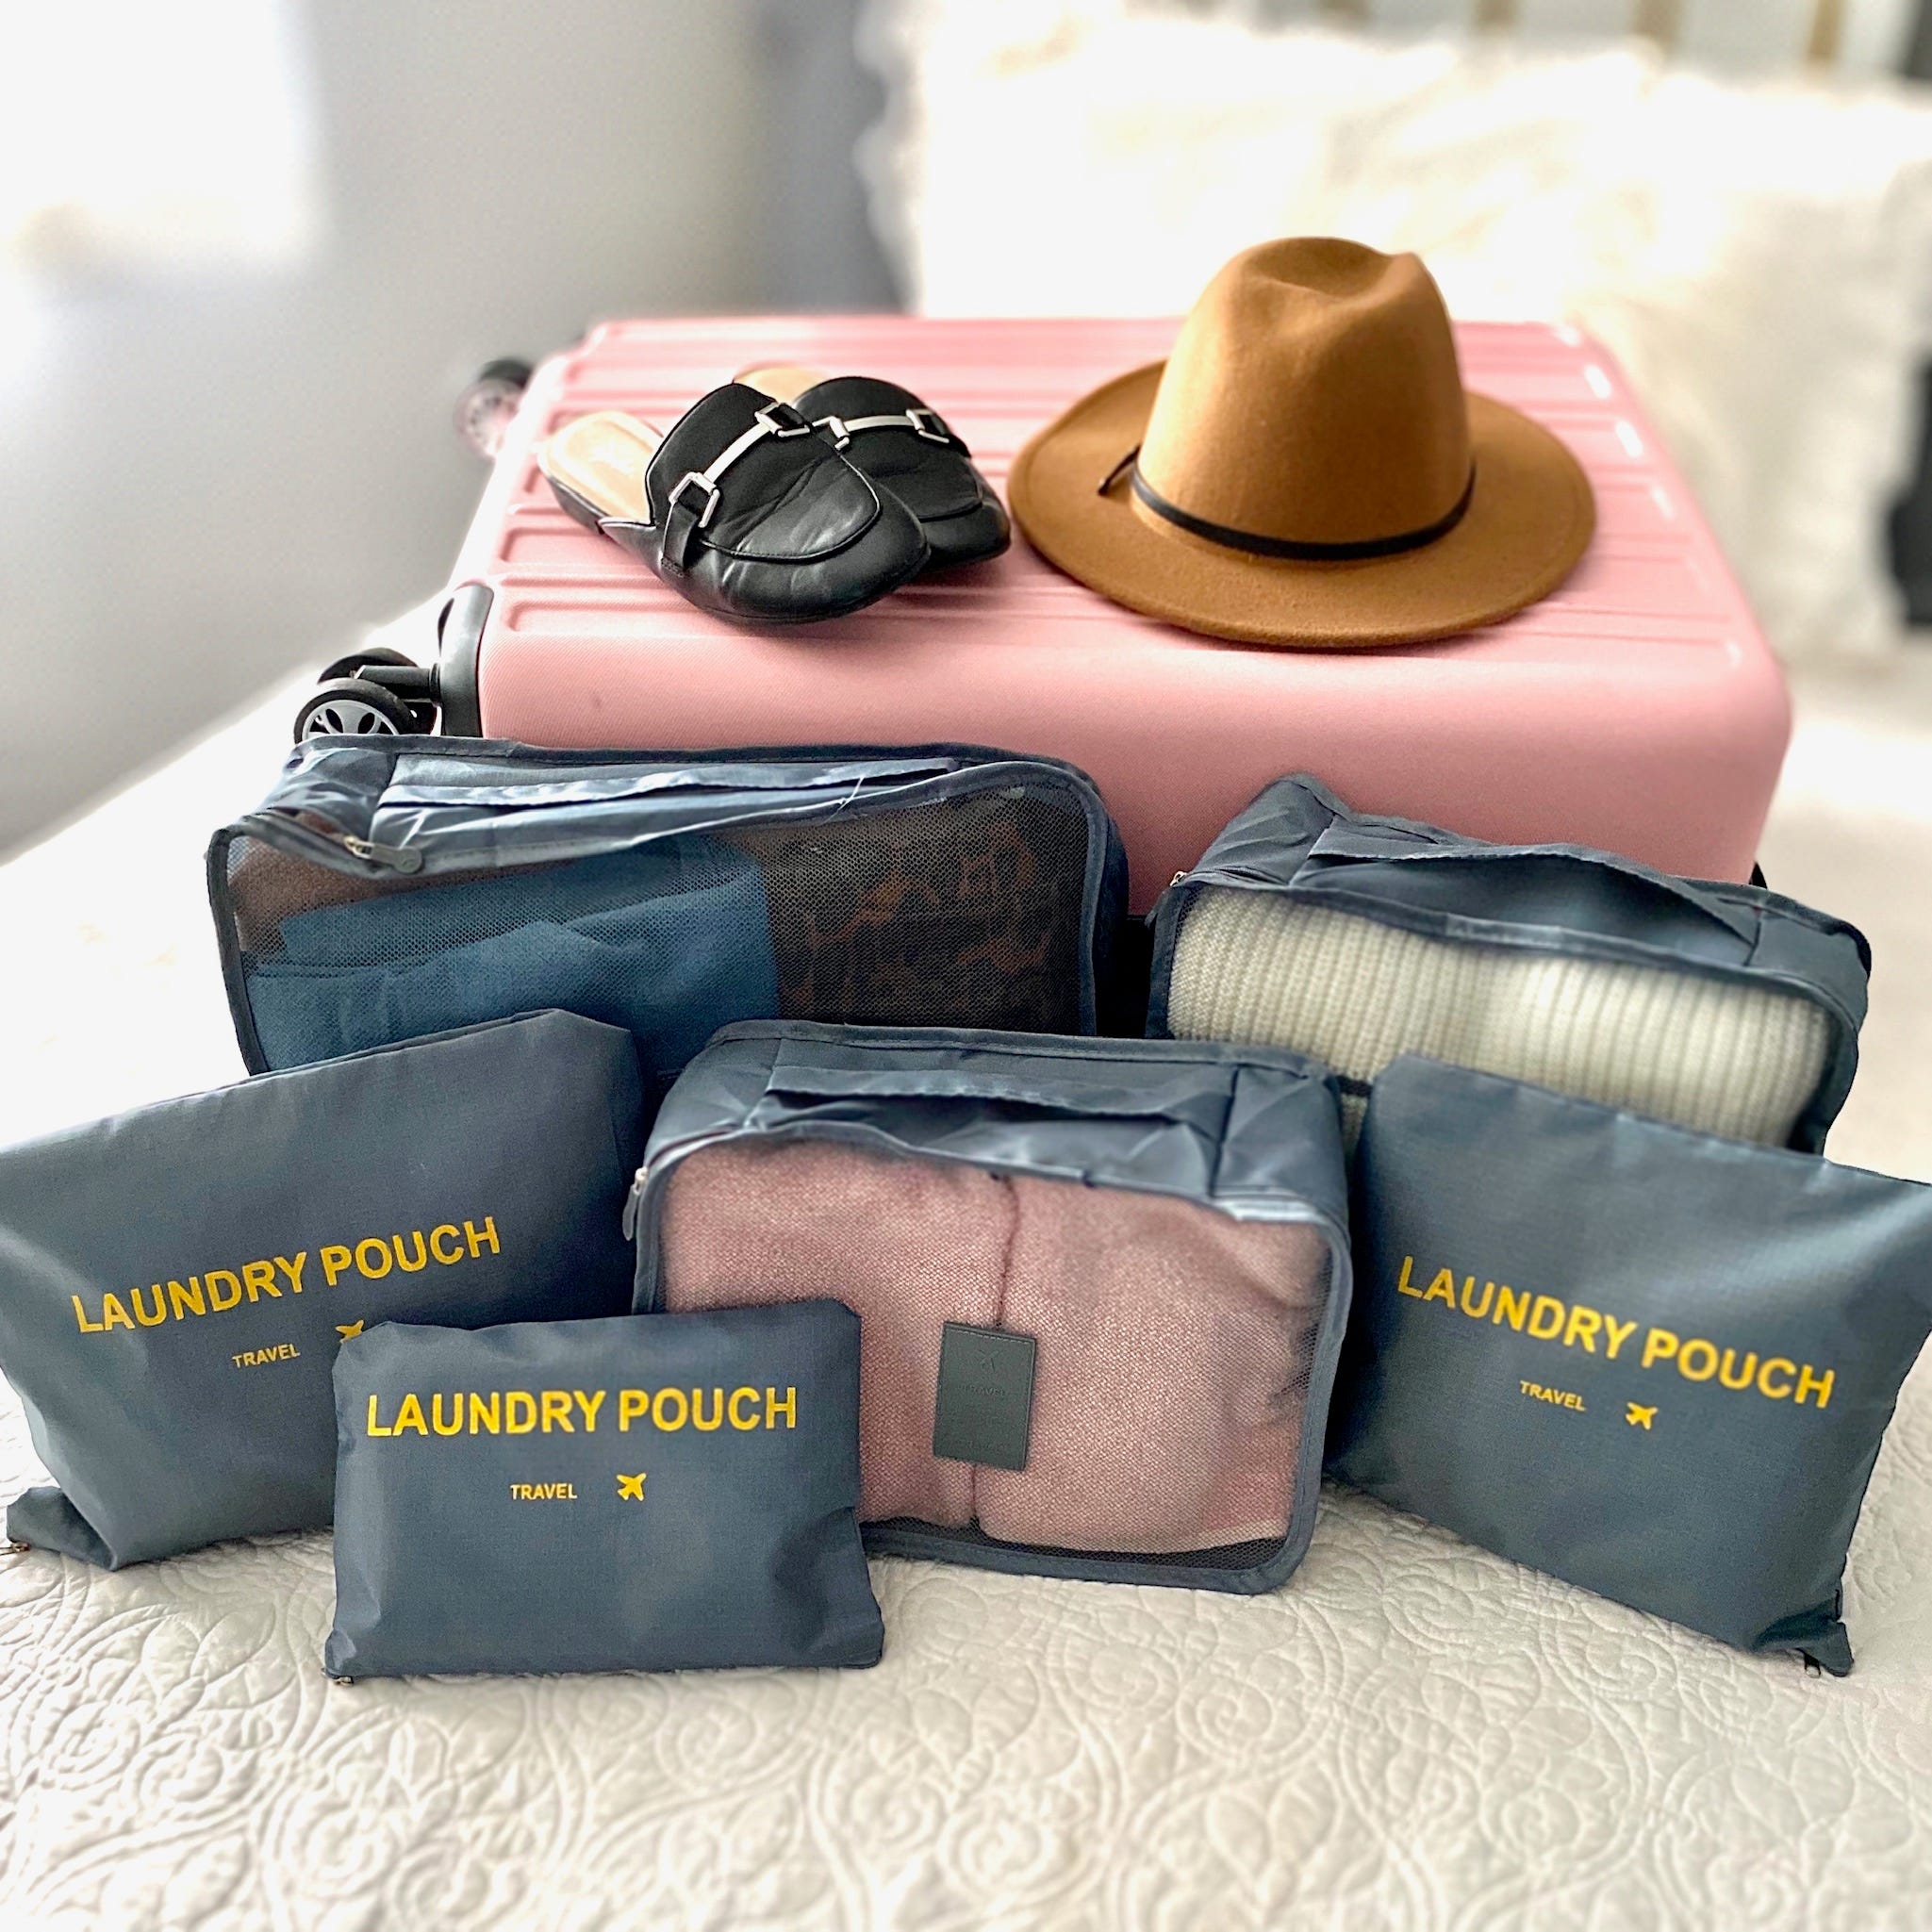 A pink suitcase, a brown hat, a black purse, and several blue packing cubes labeled 'LAUNDRY POUCH.'